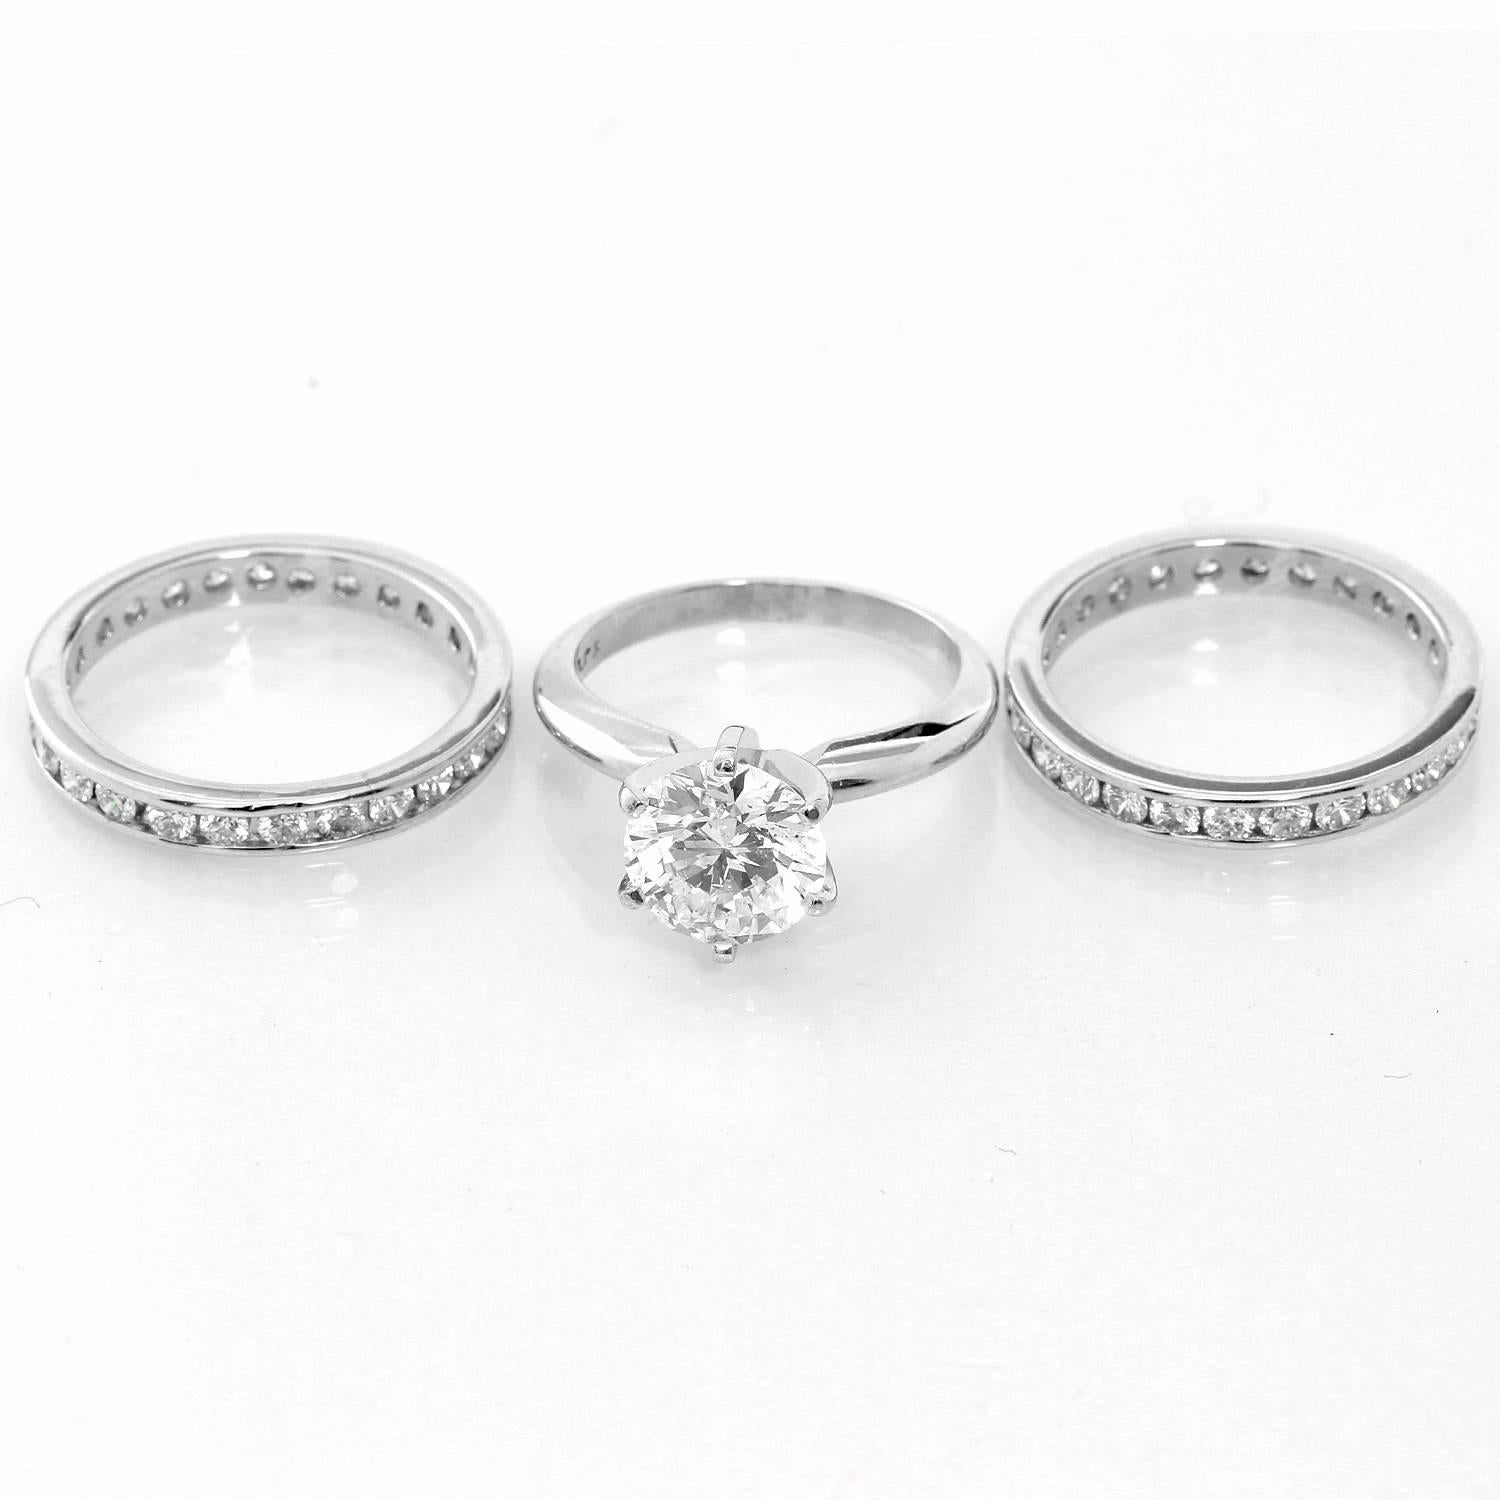 Round Brilliant Cut Solitaire and Diamond Bands - . Platinum Round Brilliant Cut Solitaire Diamond Ring Size 5 - . Stunning 1 Round brilliant solitaire diamond totaling 2cts. Diamond color E. Diamond Clarity S1-2. Total weight 5.4 grams. GIA